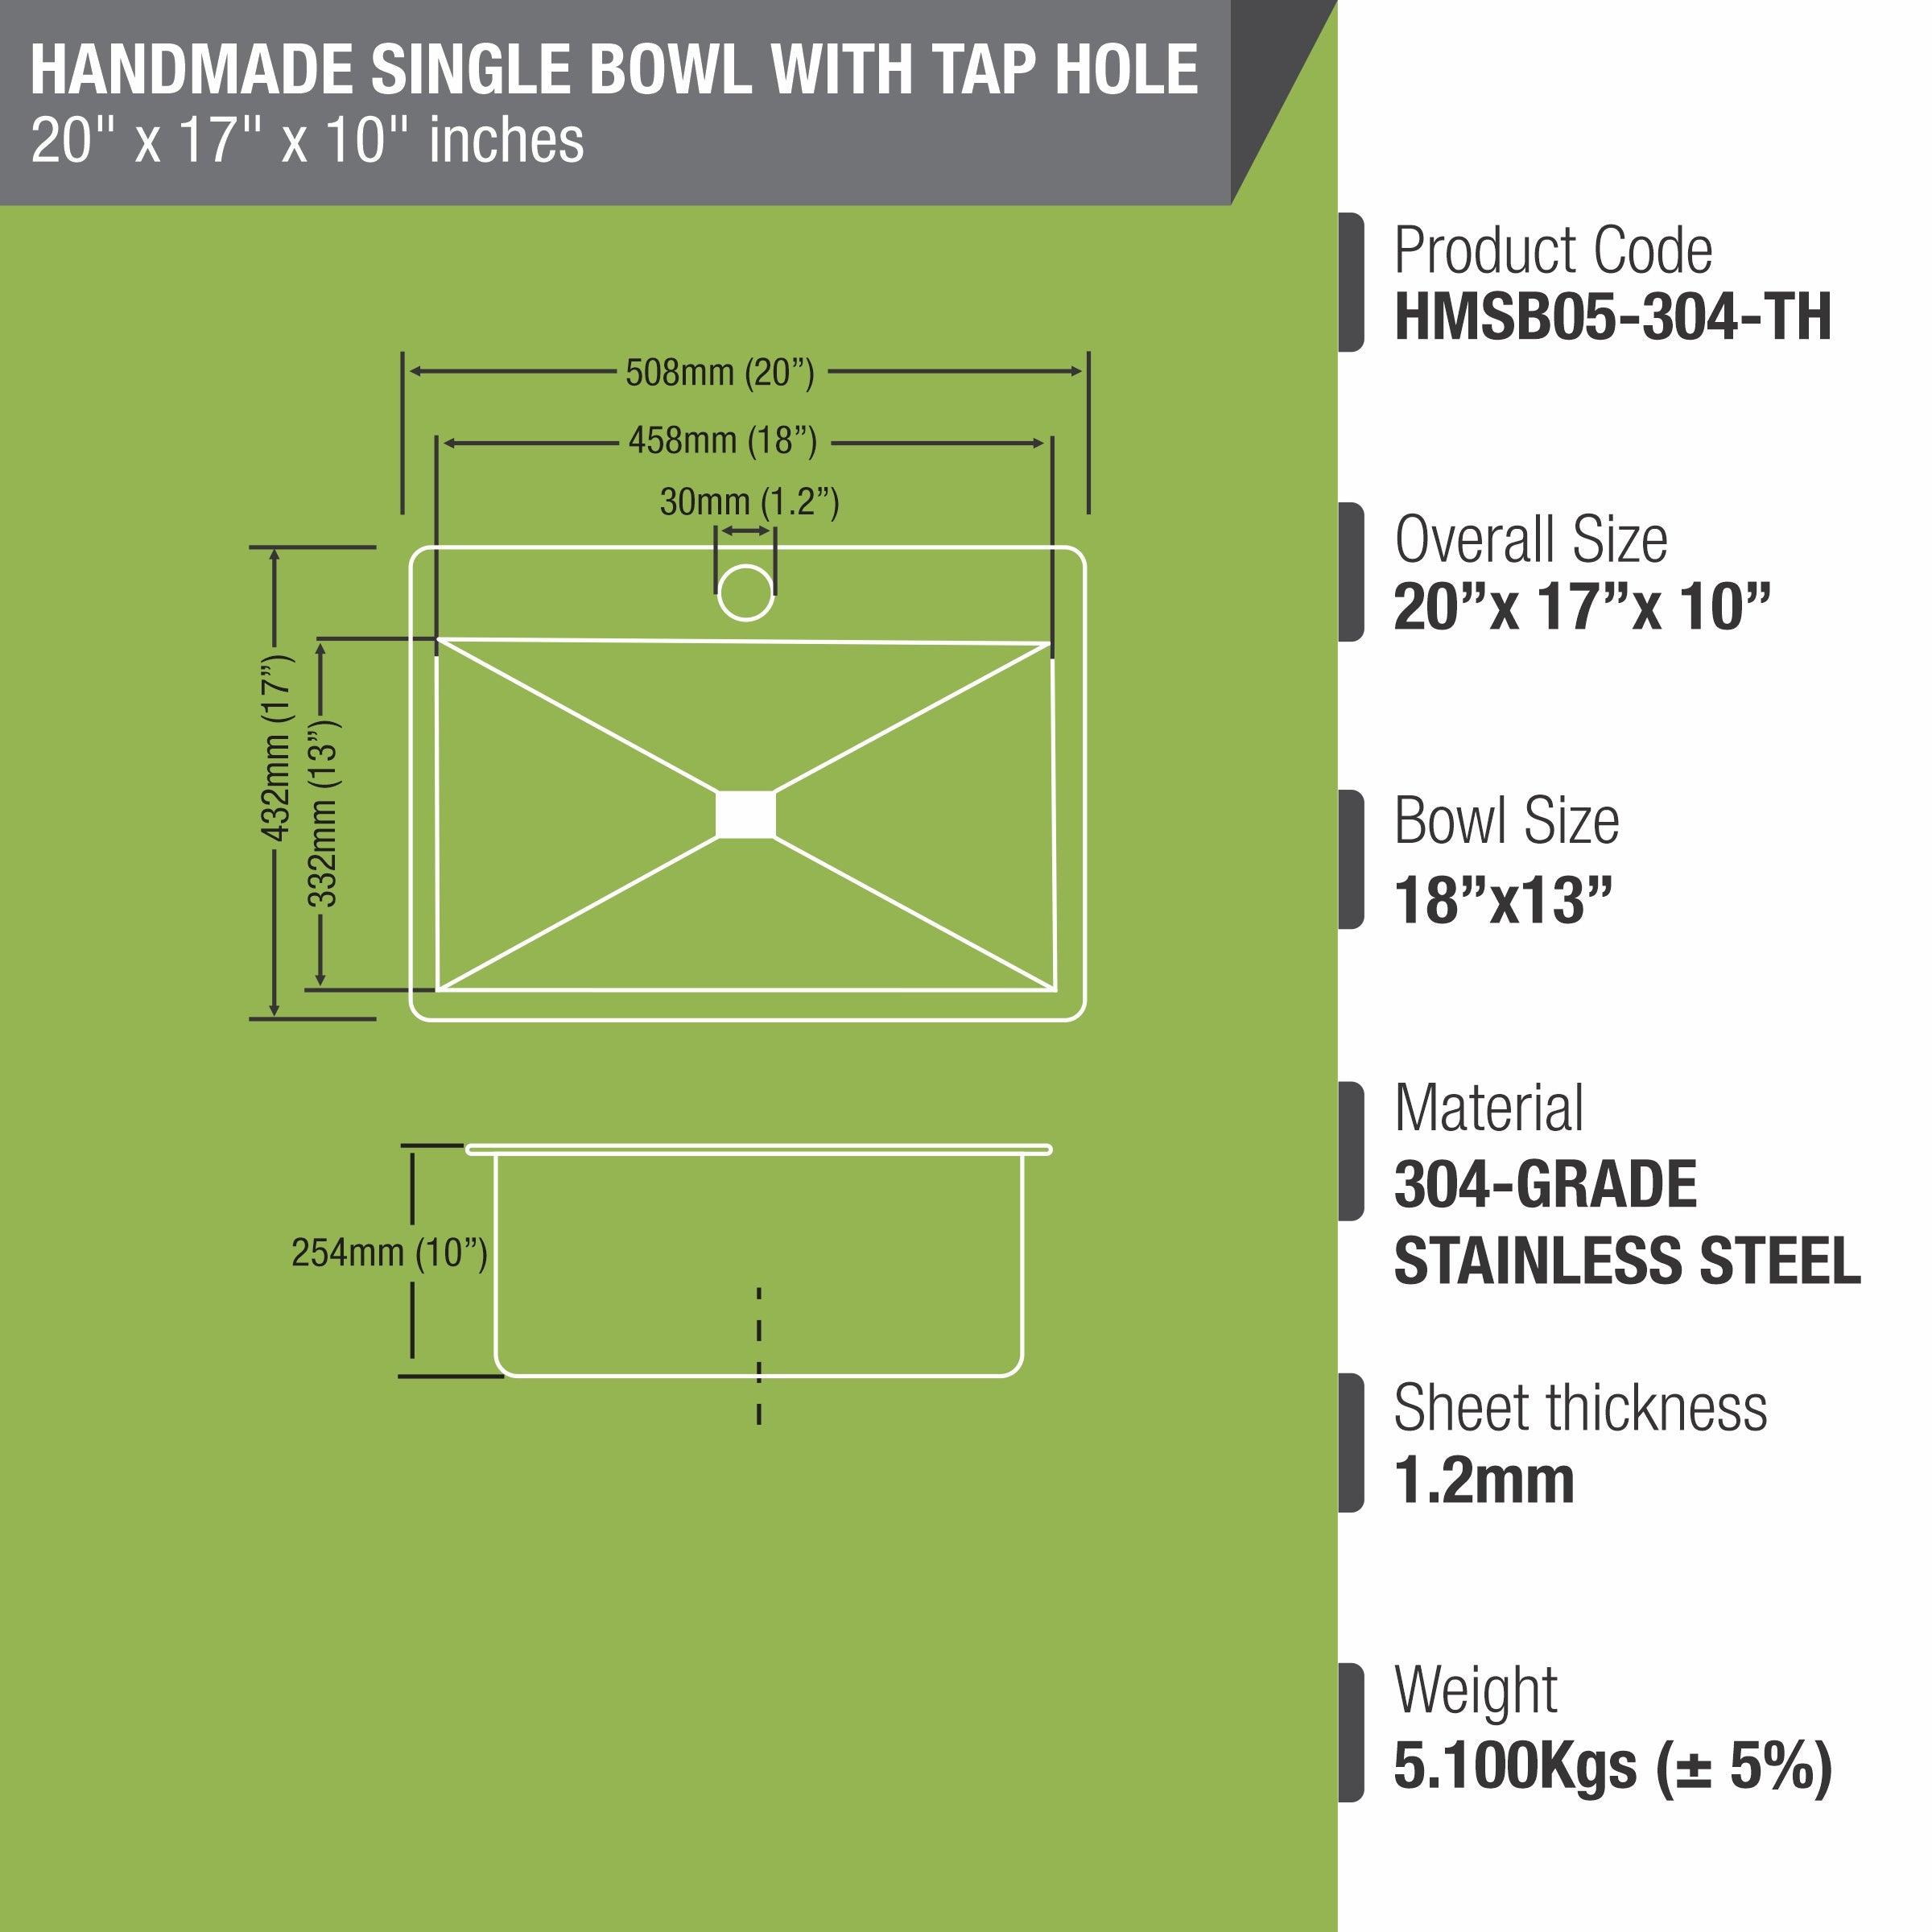 Handmade Single Bowl 304-Grade Kitchen Sink with Tap Hole (20 x 17 x 10 Inches) sizes and dimensions